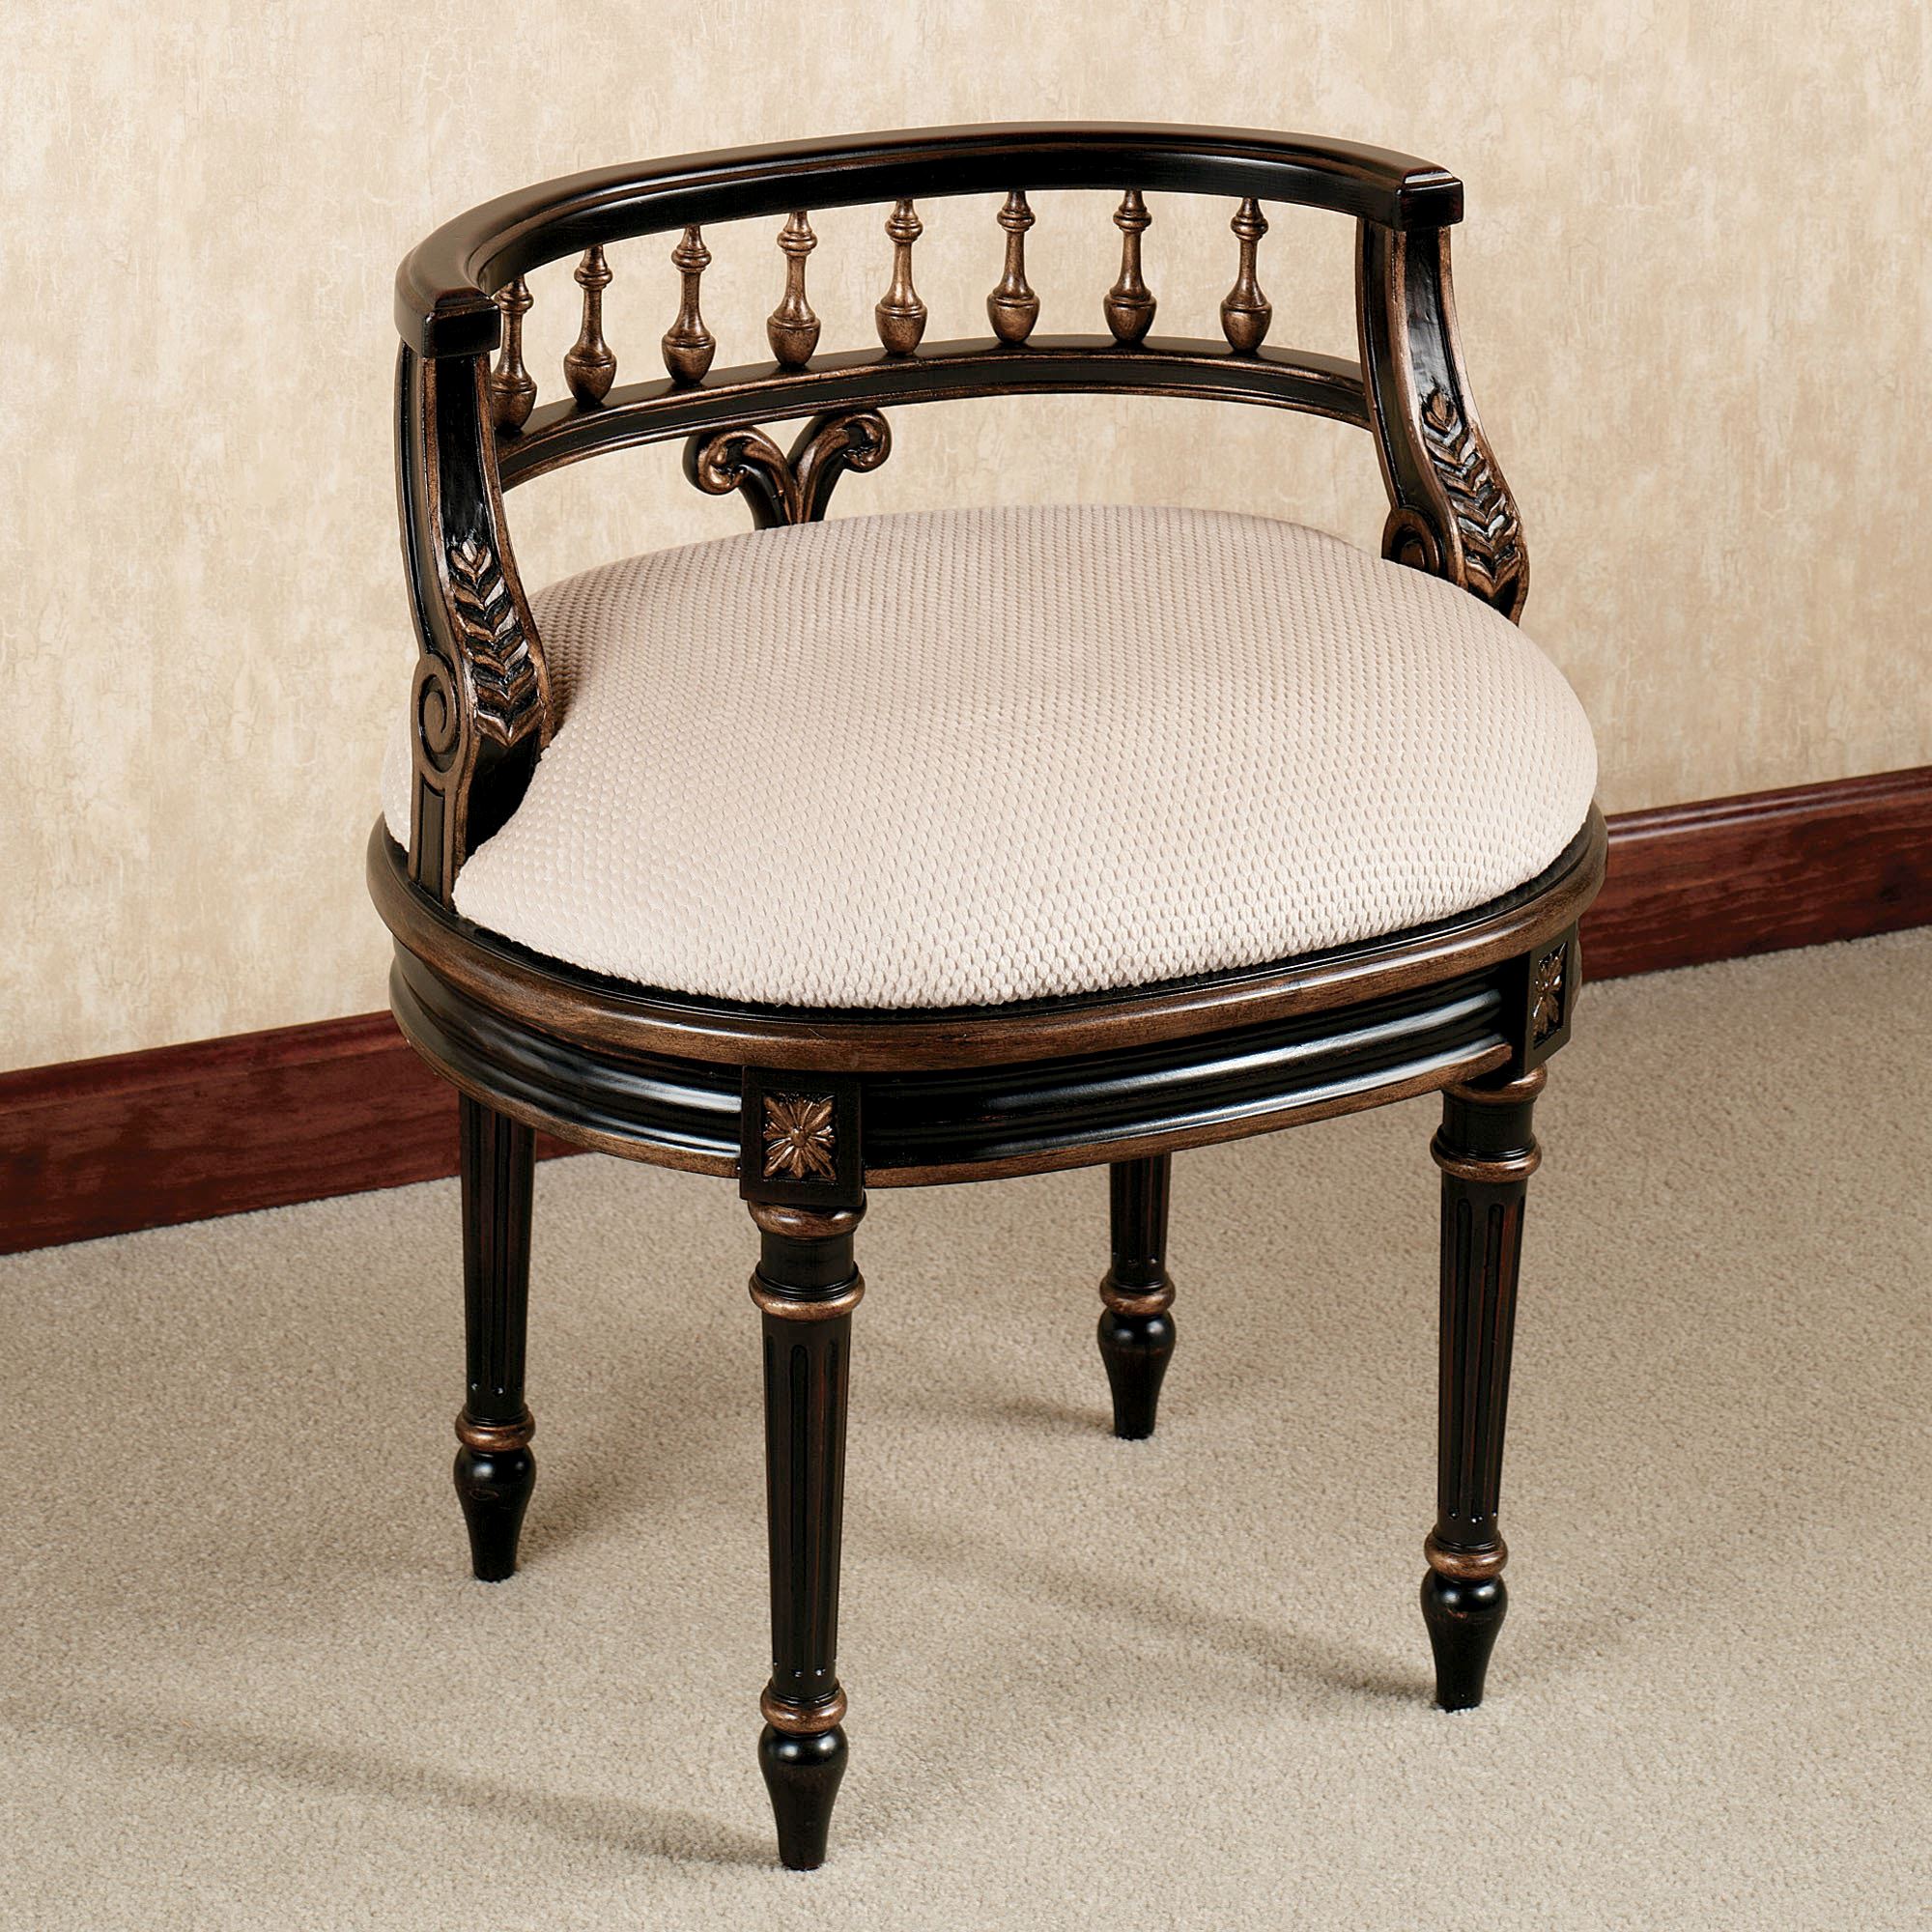 queensley vanity chair black walnut. click to expand KDUERGD